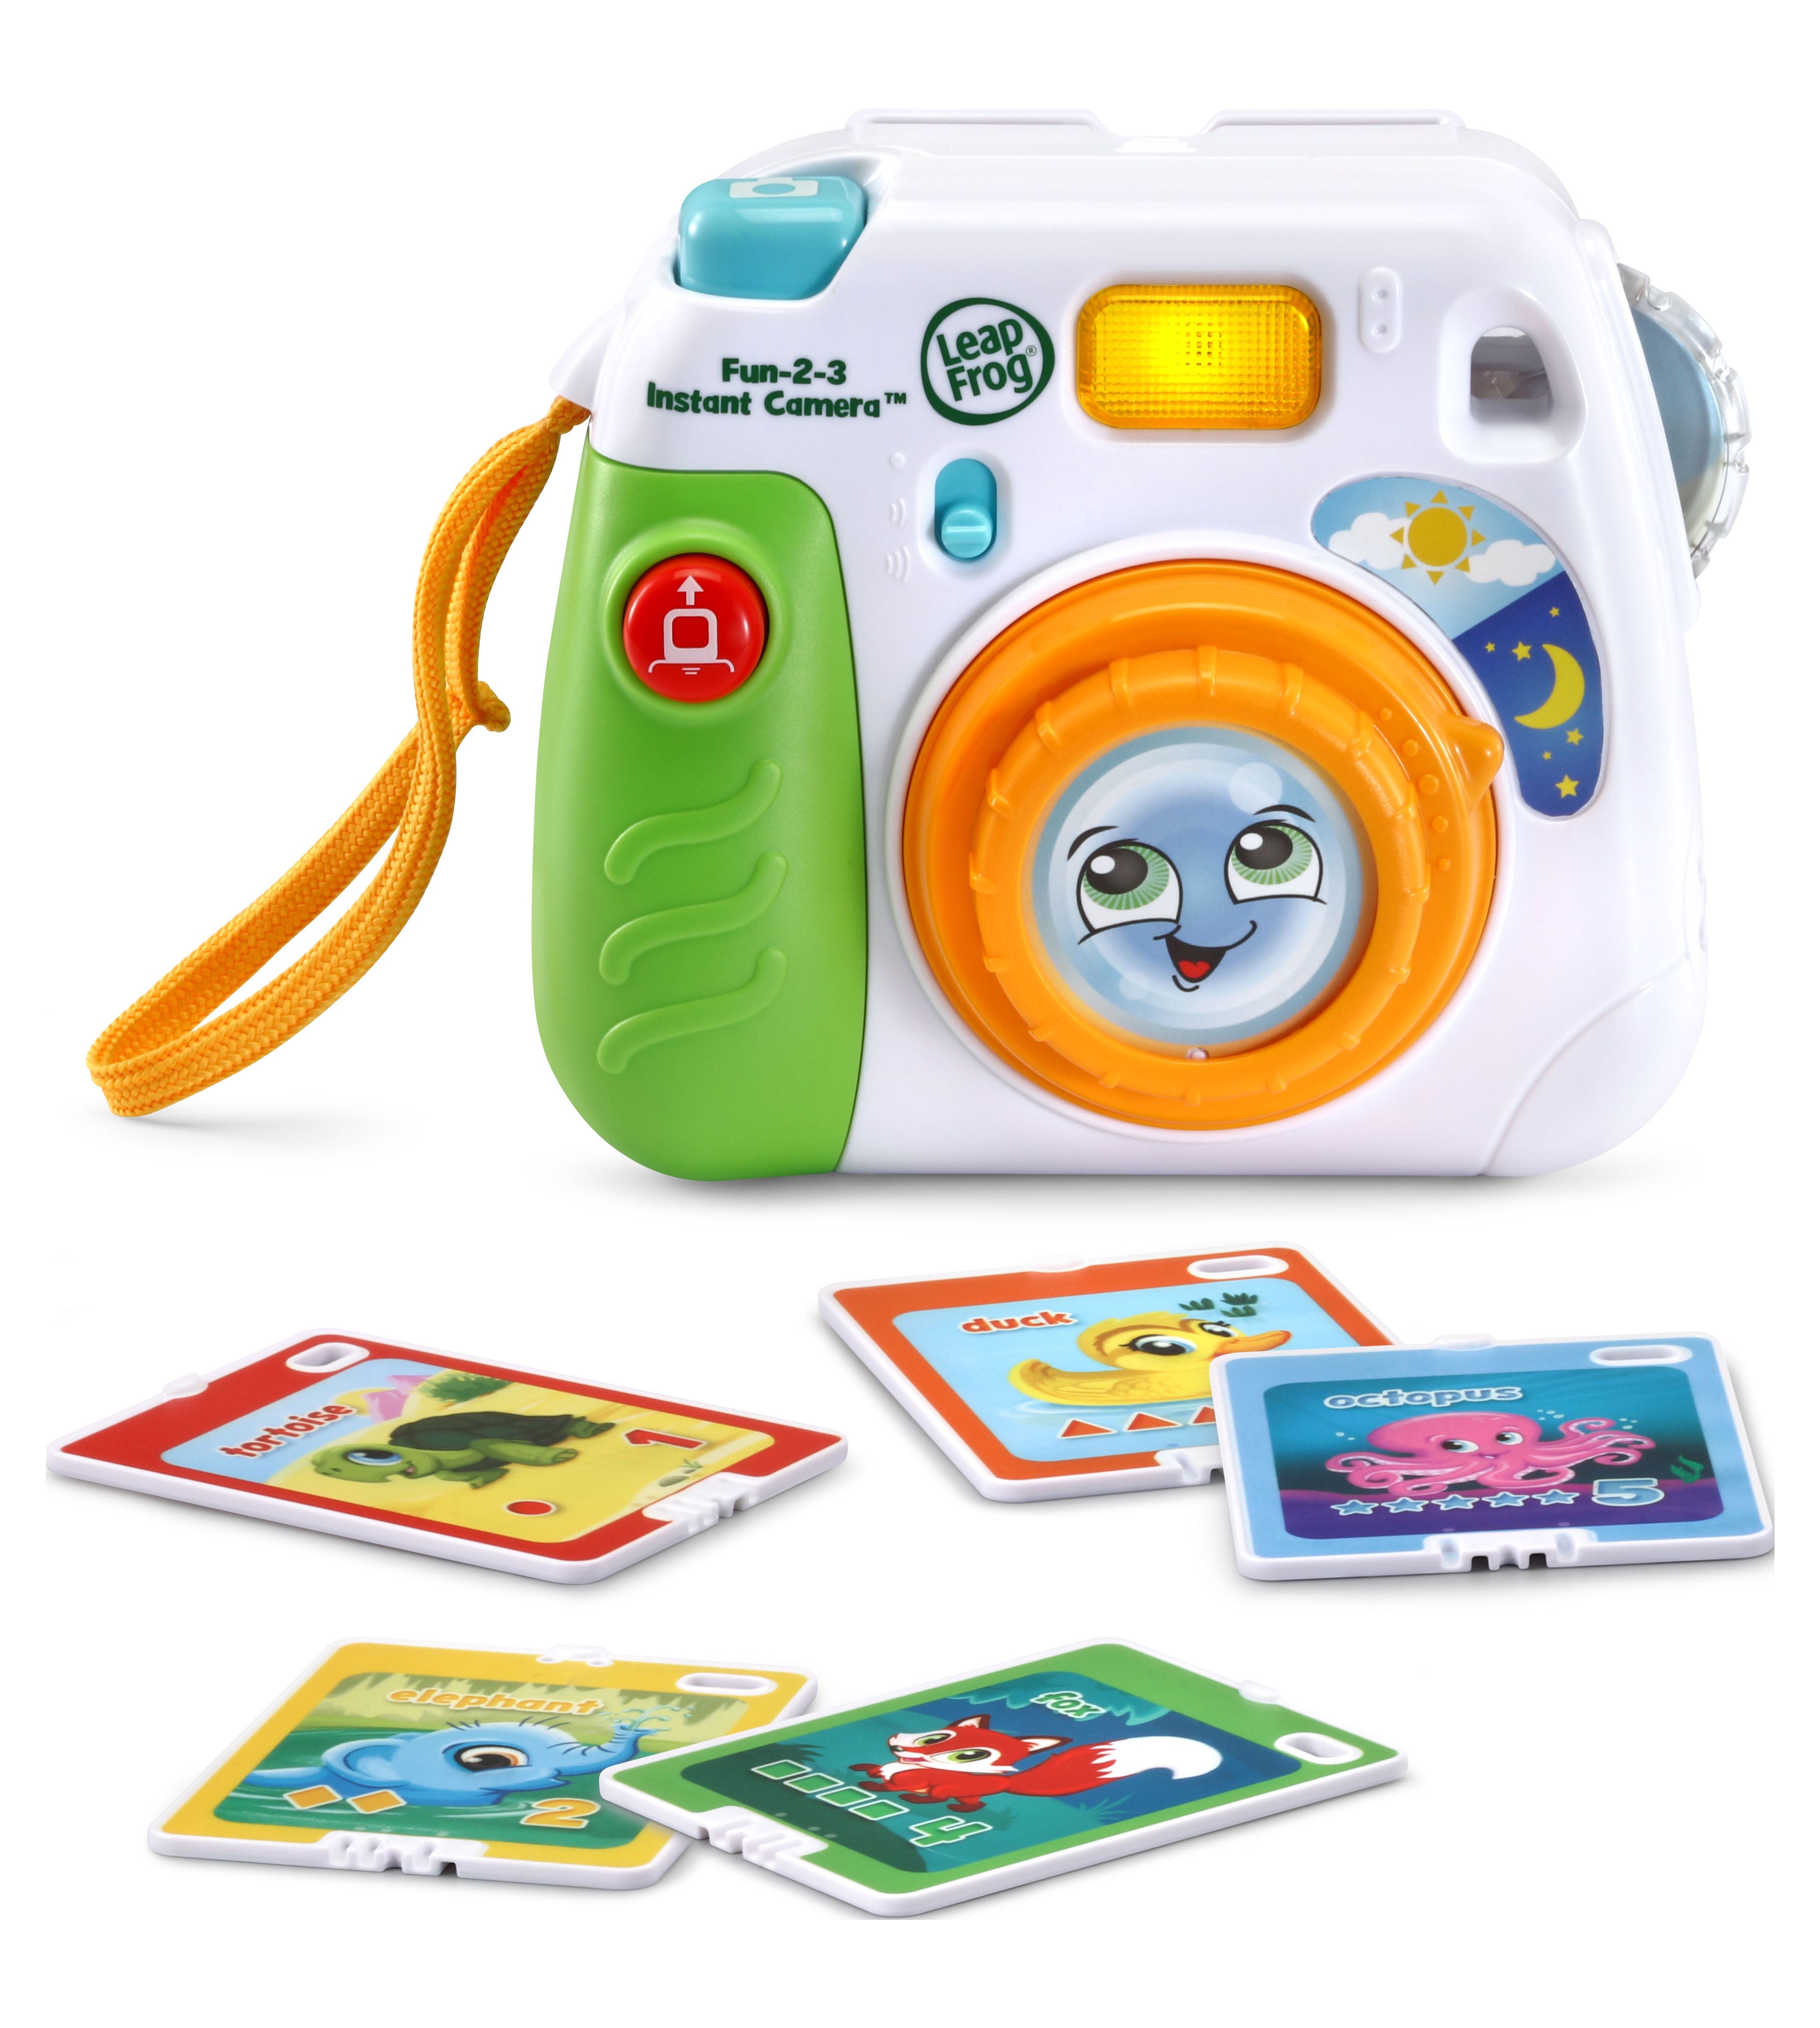 LeapFrog® Fun-2-3 Instant Camera™ Educational Pretend Photo Camera Toy - image 1 of 8